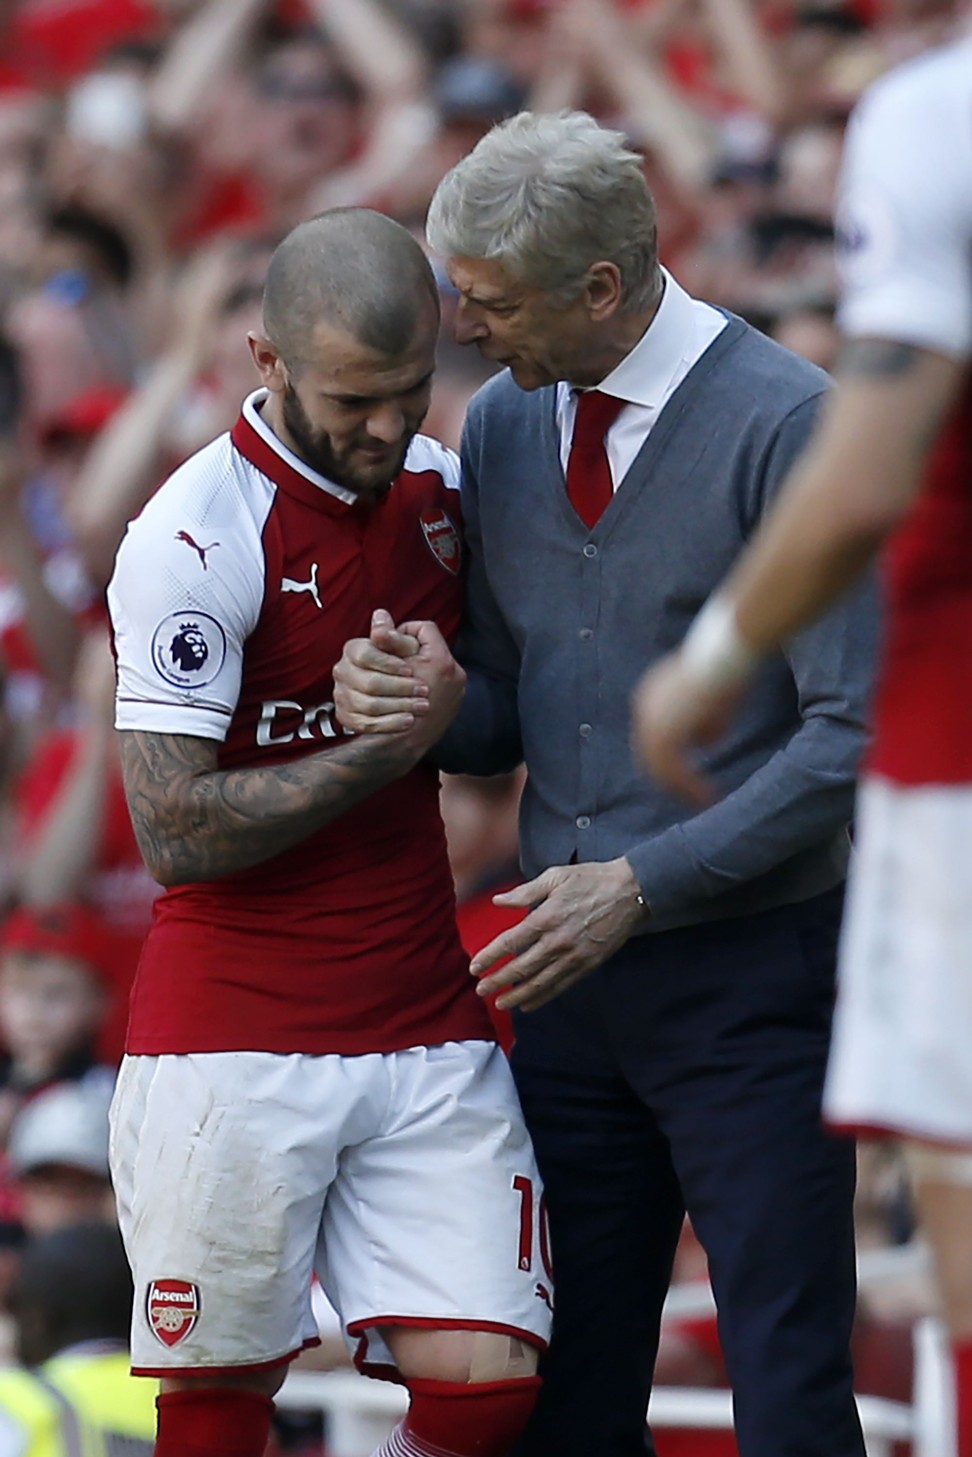 Arsenal’s Jack Wilshere (left) will not be going to Russia with England this summer. Photo: AFP